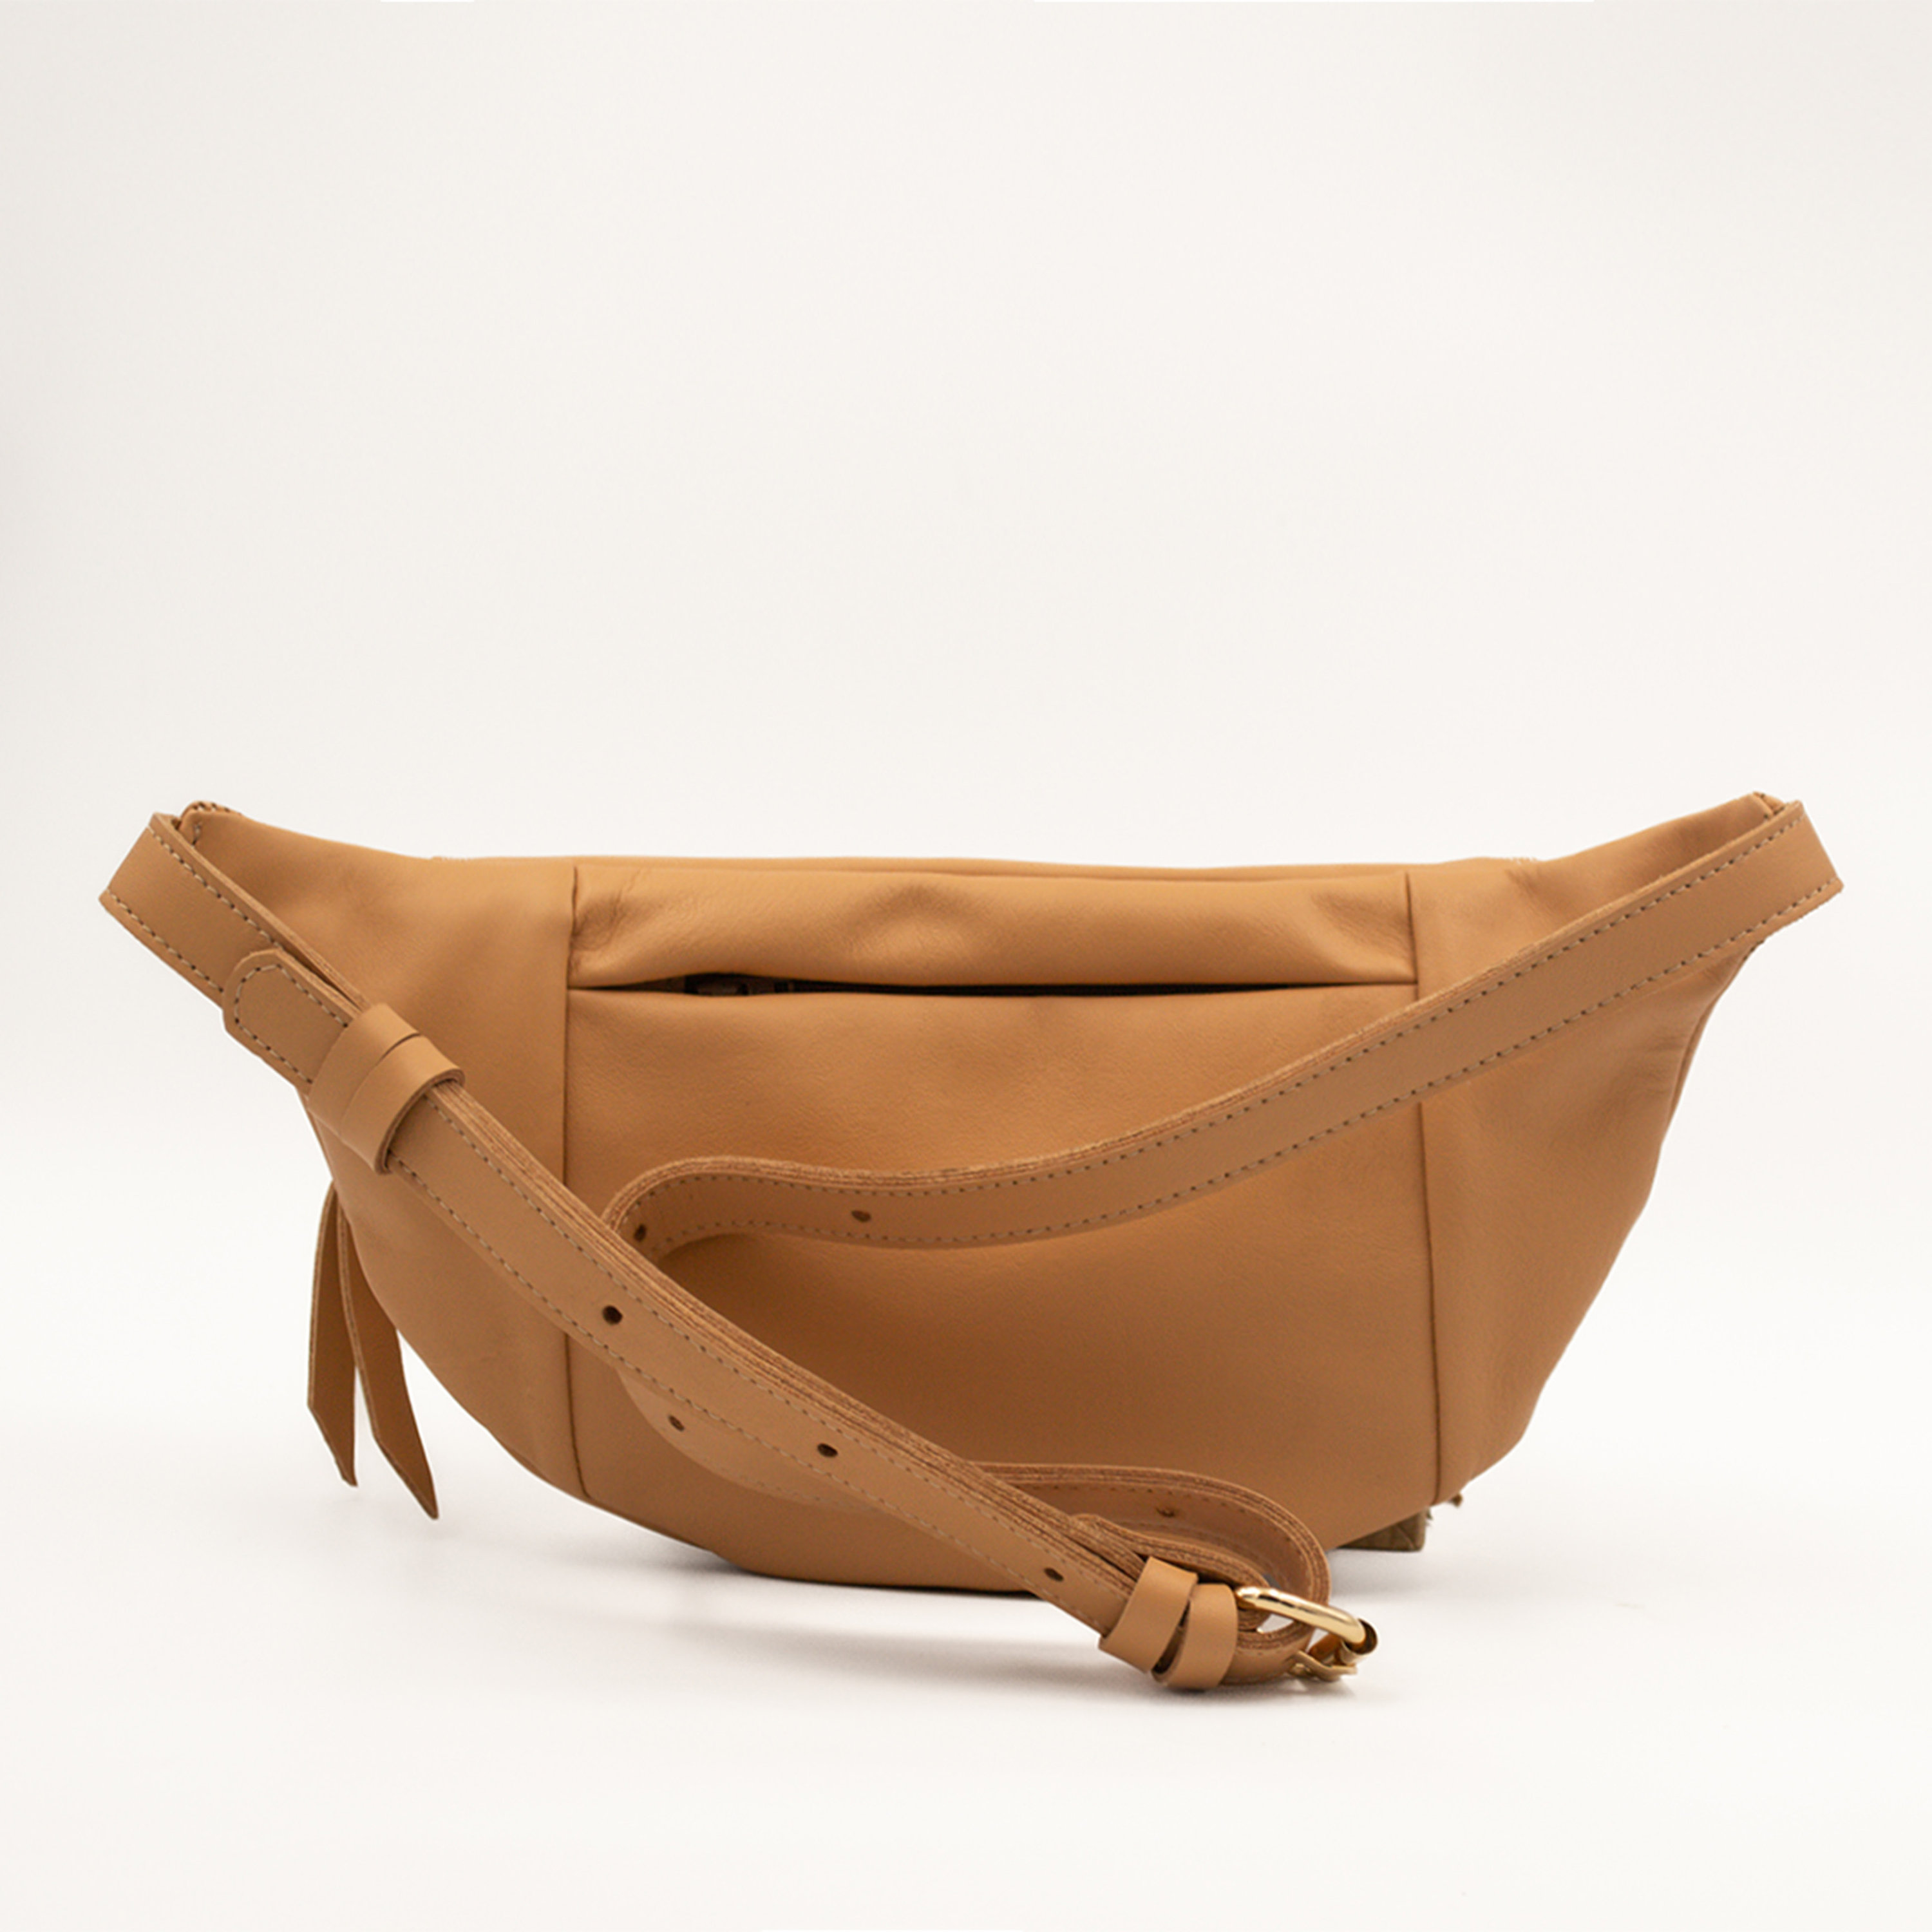 Leather Fanny Pack SE045 - Series Fanny Pack / Waist Bag by